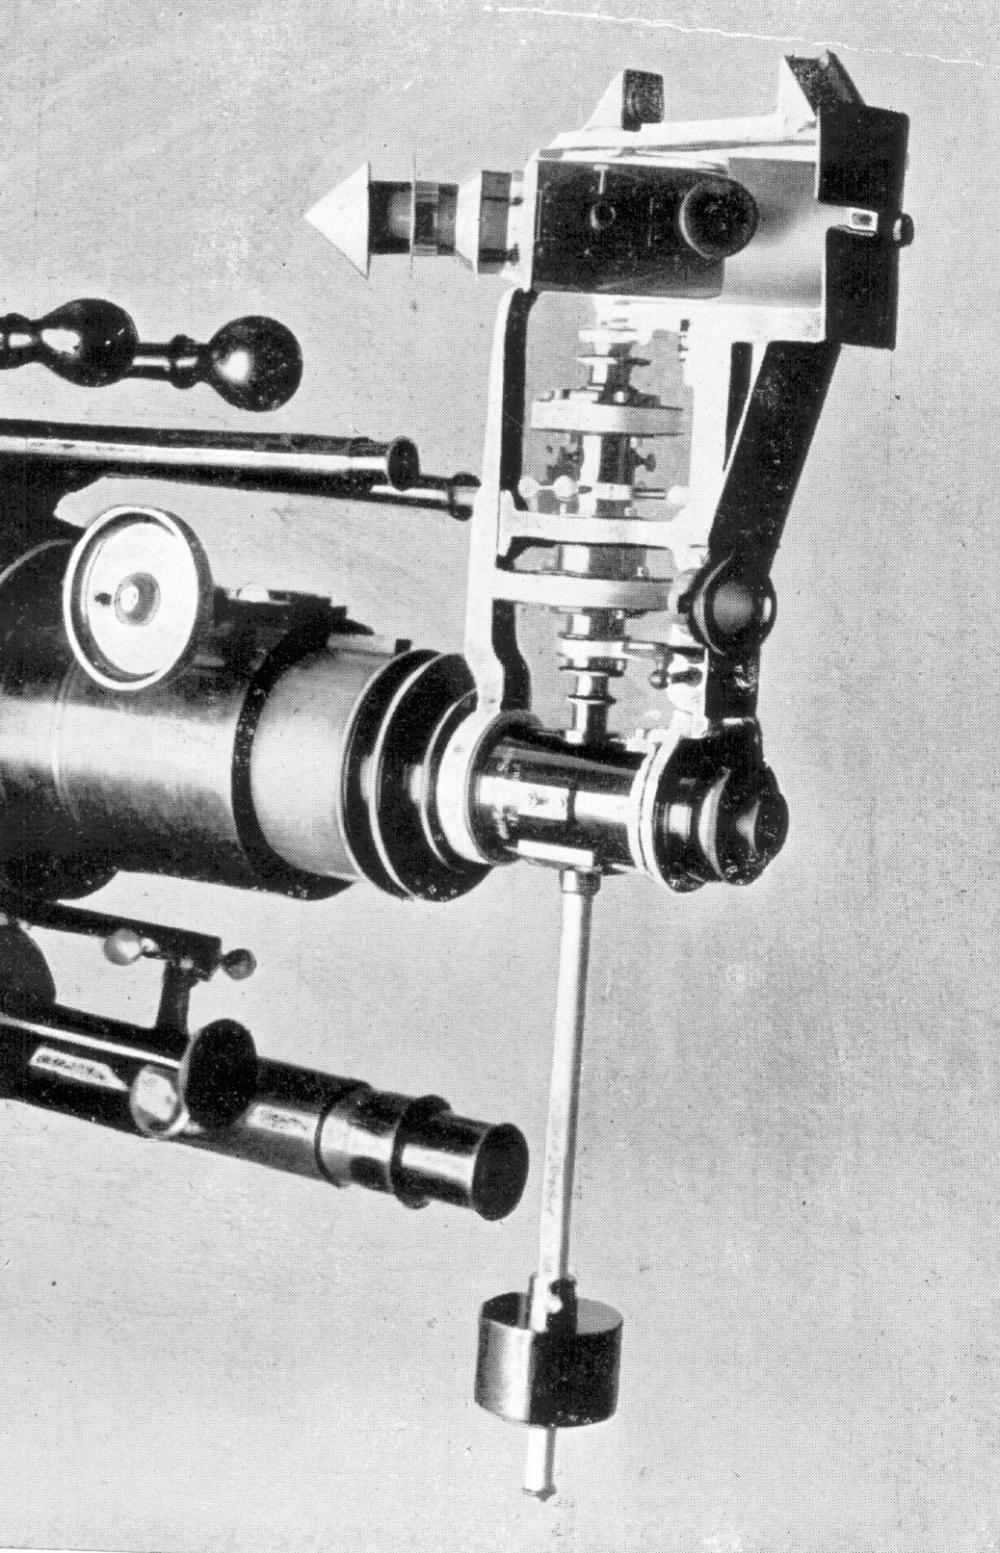 6-inch refractor, made by Merz of Munich, used wit